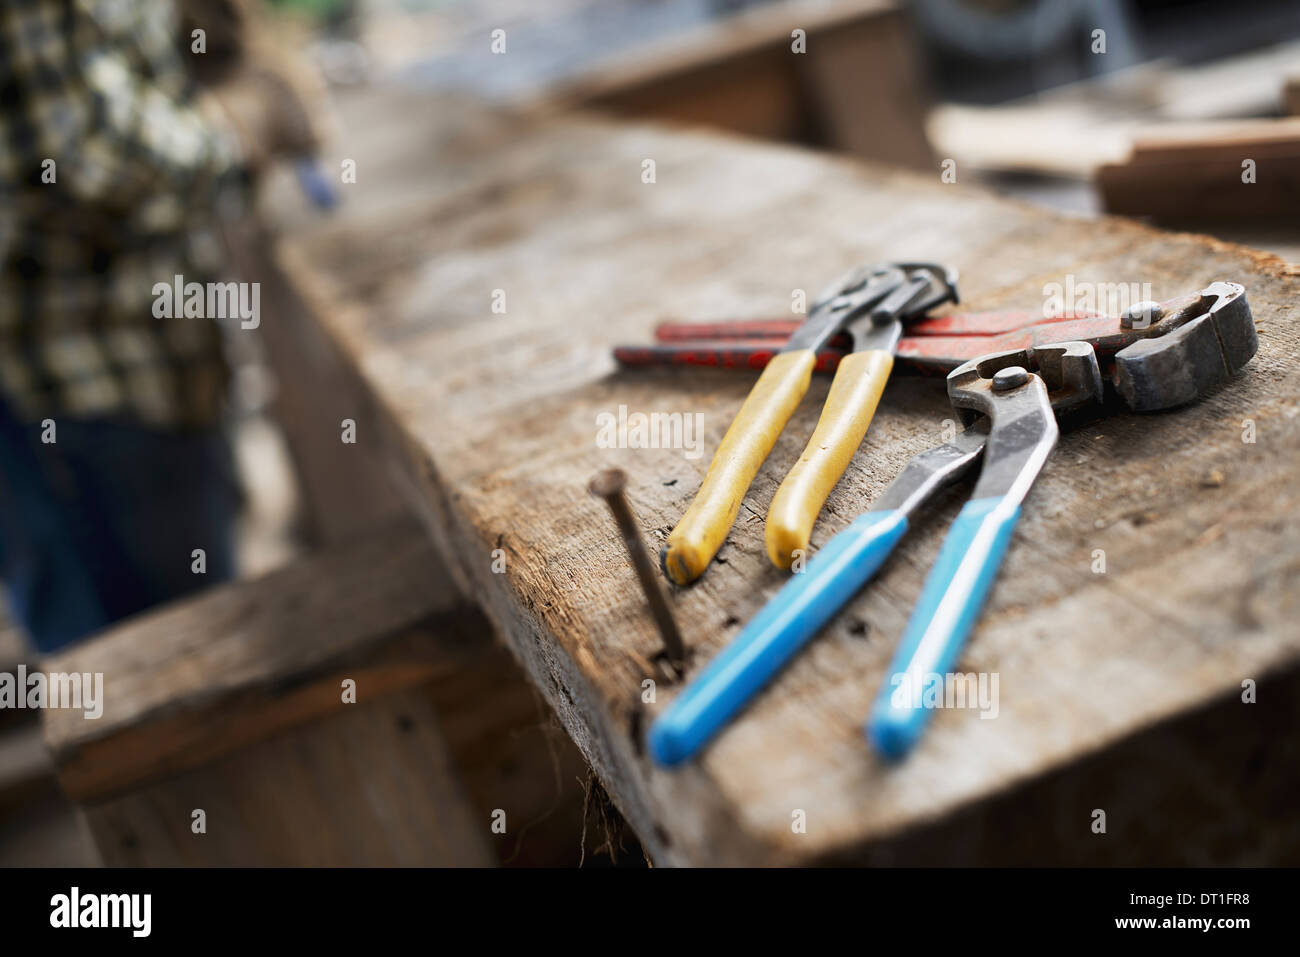 A reclaimed lumber workshop A person at a workbench and tools grippers and  pliers lined up on a plank of wood Stock Photo - Alamy